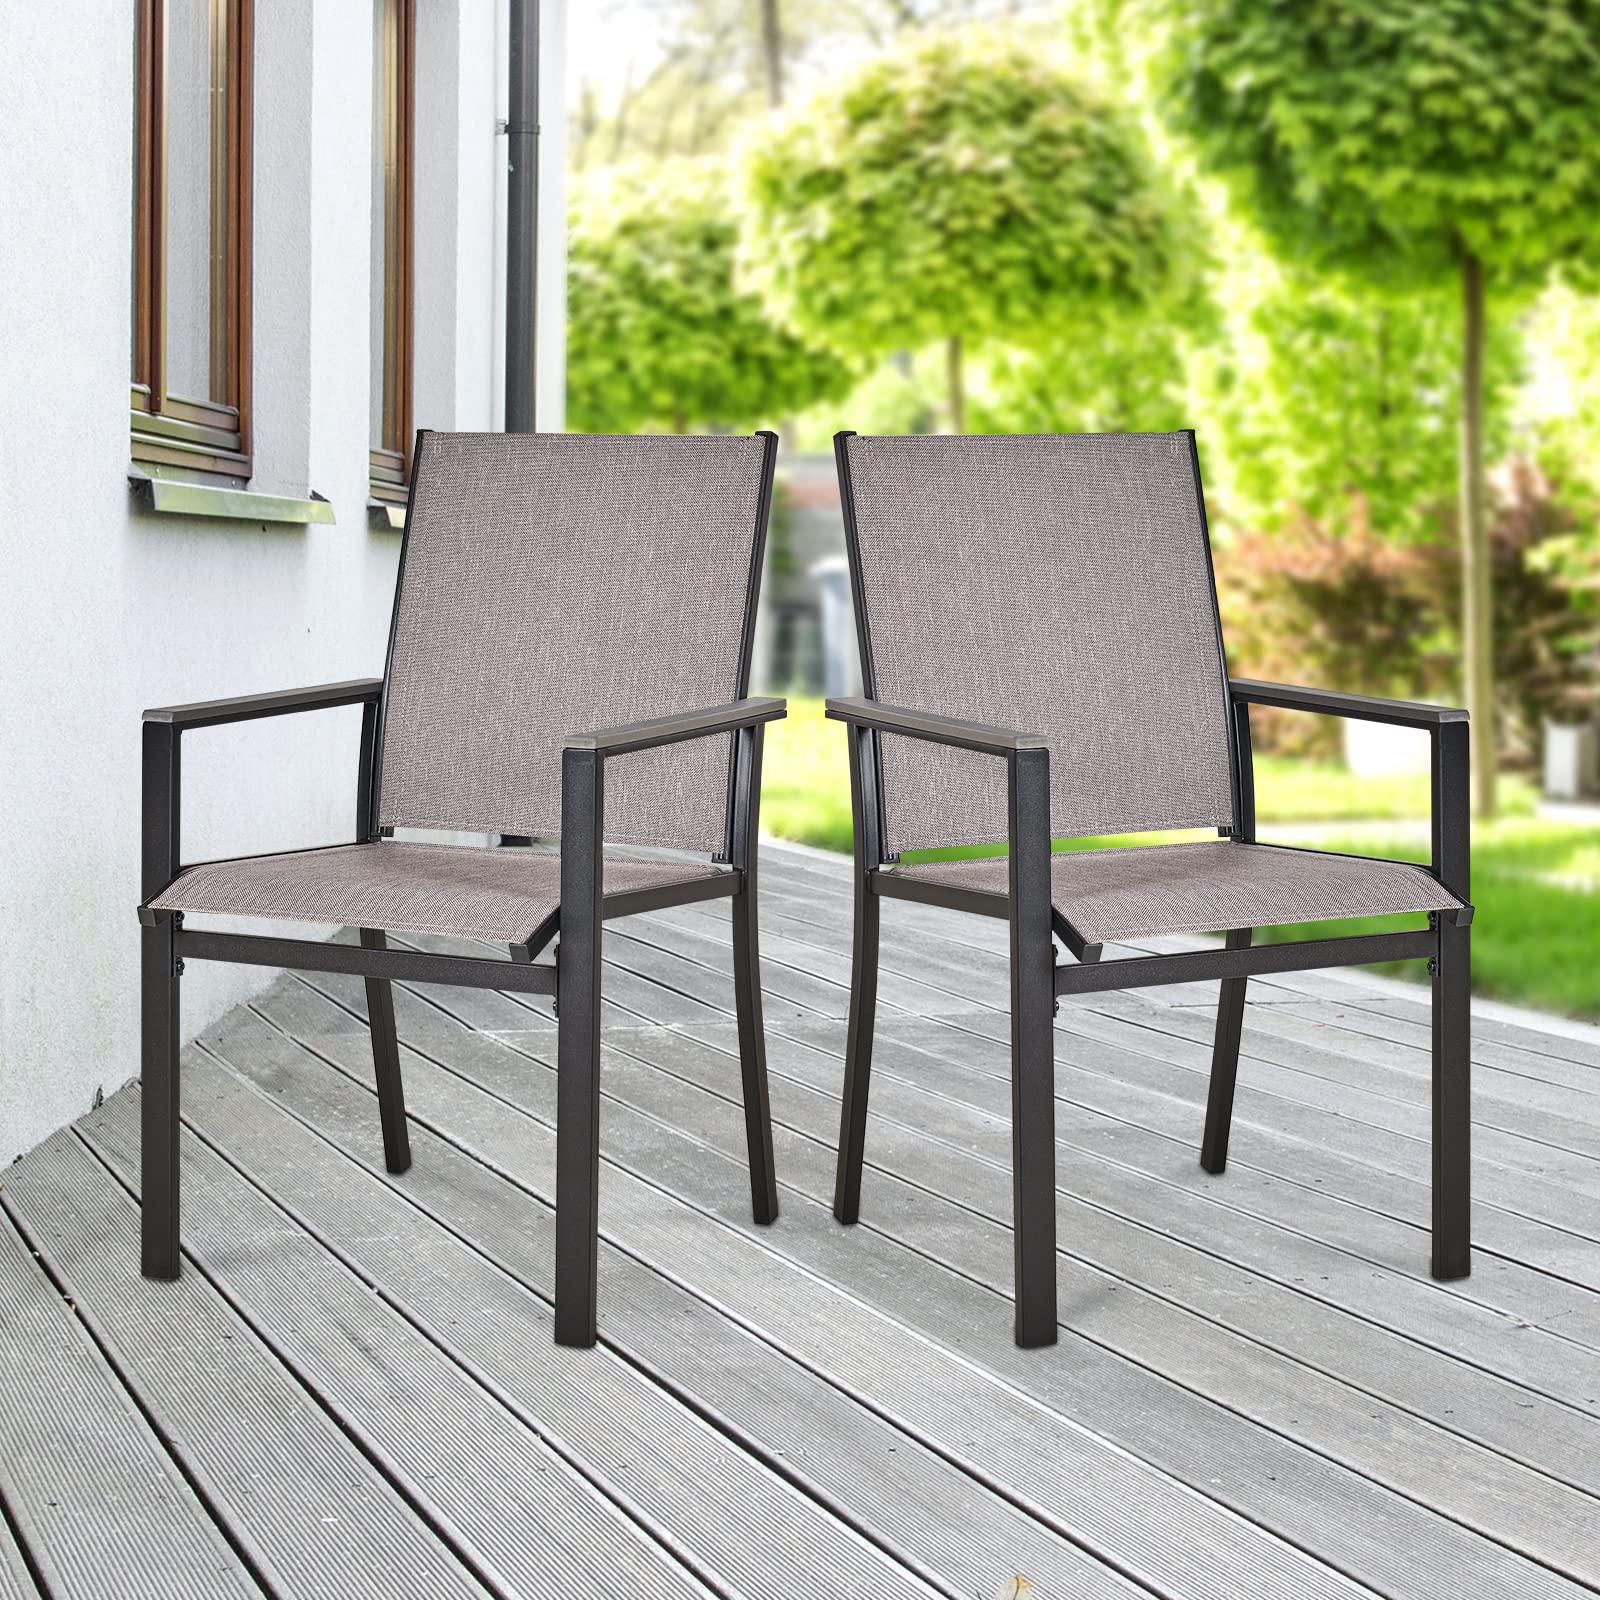 meooem patio chair set of 2, textilene patio furniture chair with armrest & black metal frame for lawn garden backyard.